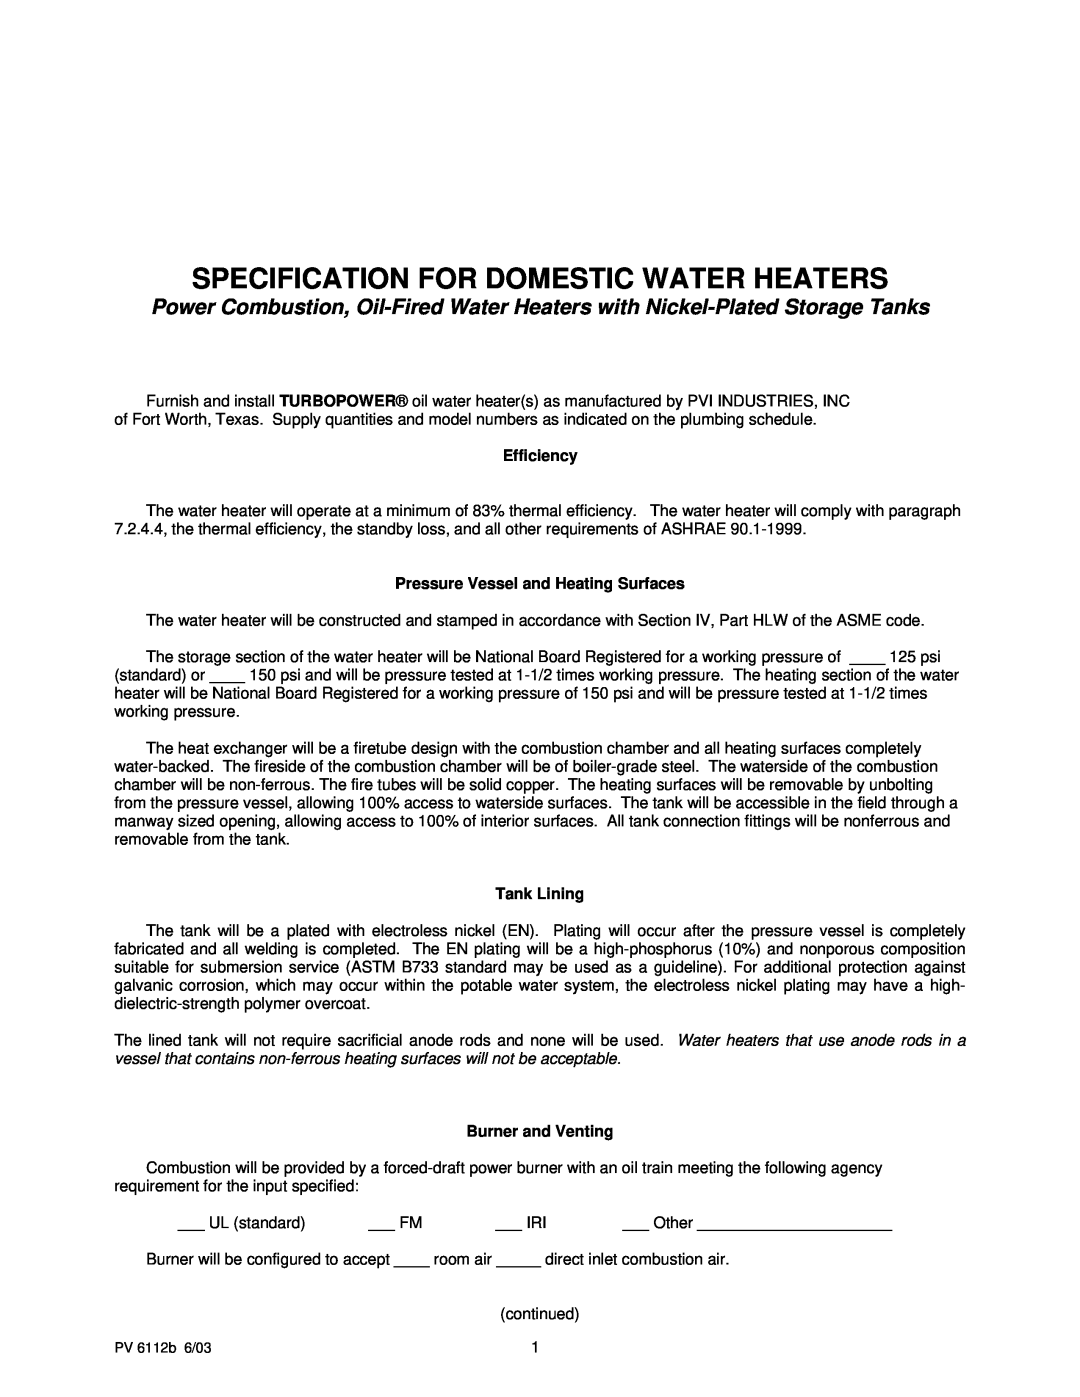 PVI Industries PV 6112b manual Specification For Domestic Water Heaters, Efficiency, Pressure Vessel and Heating Surfaces 